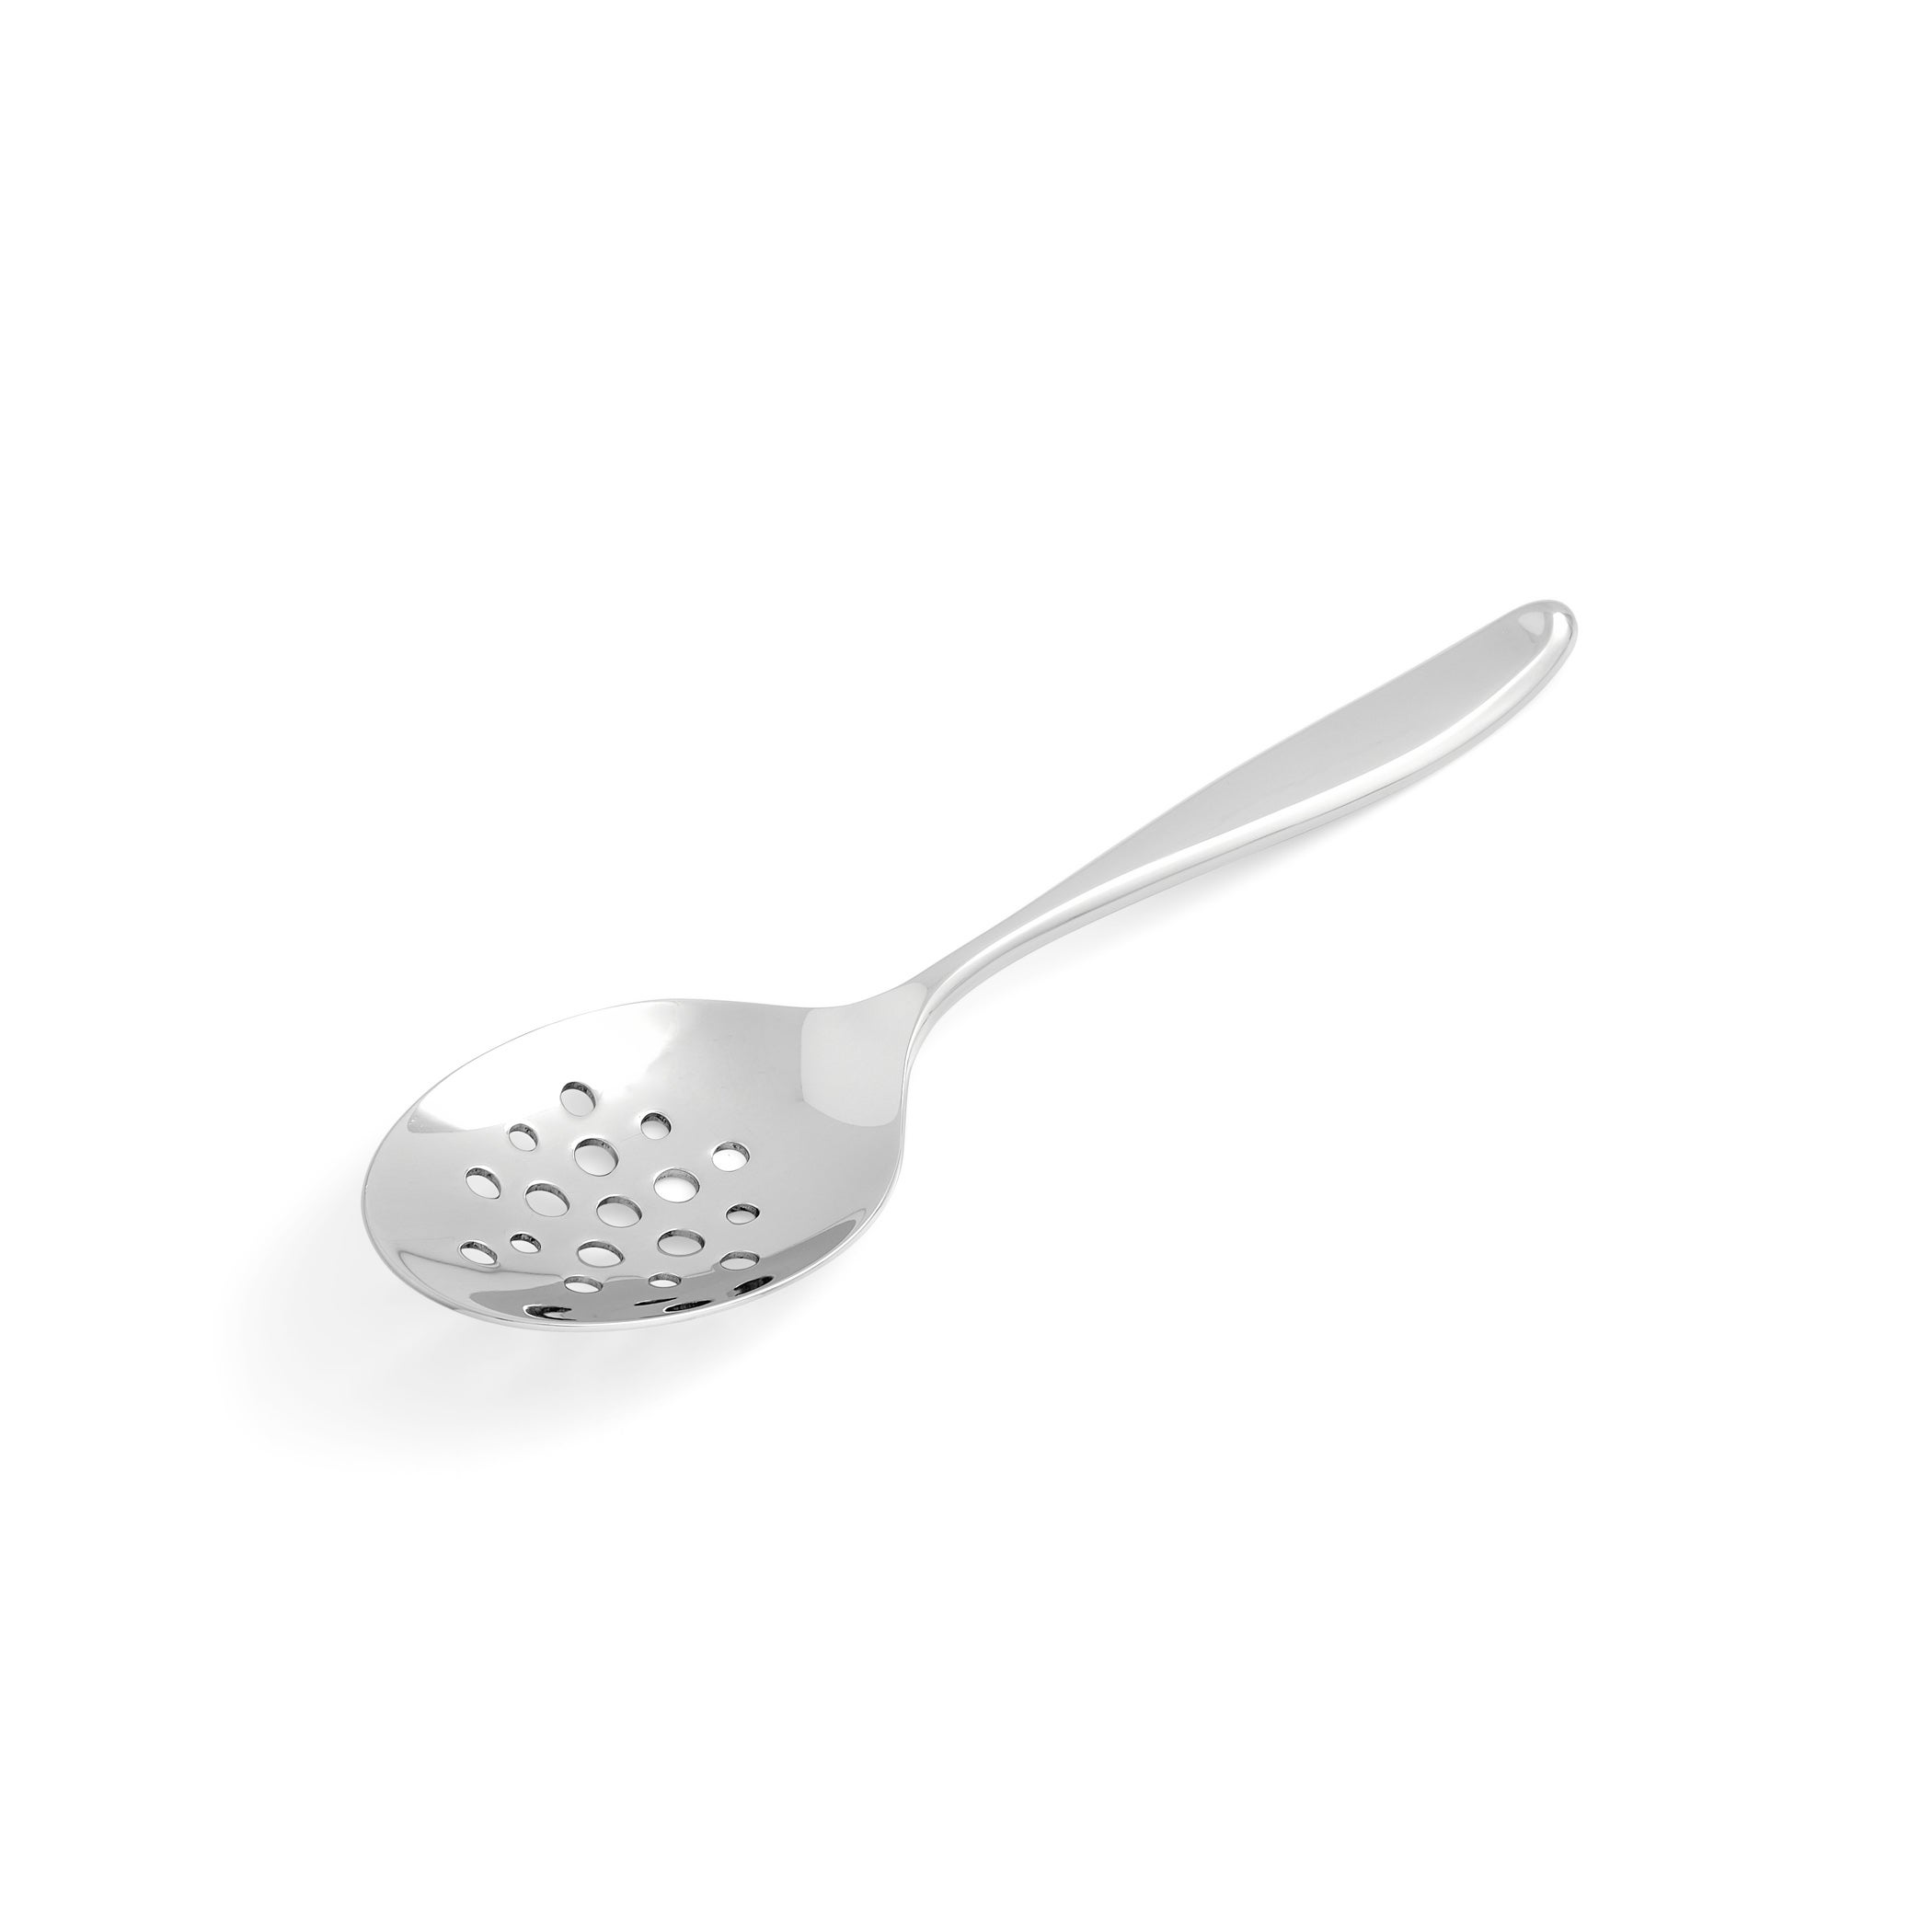 Sophie Conran for Portmeirion Slotted Spoon 